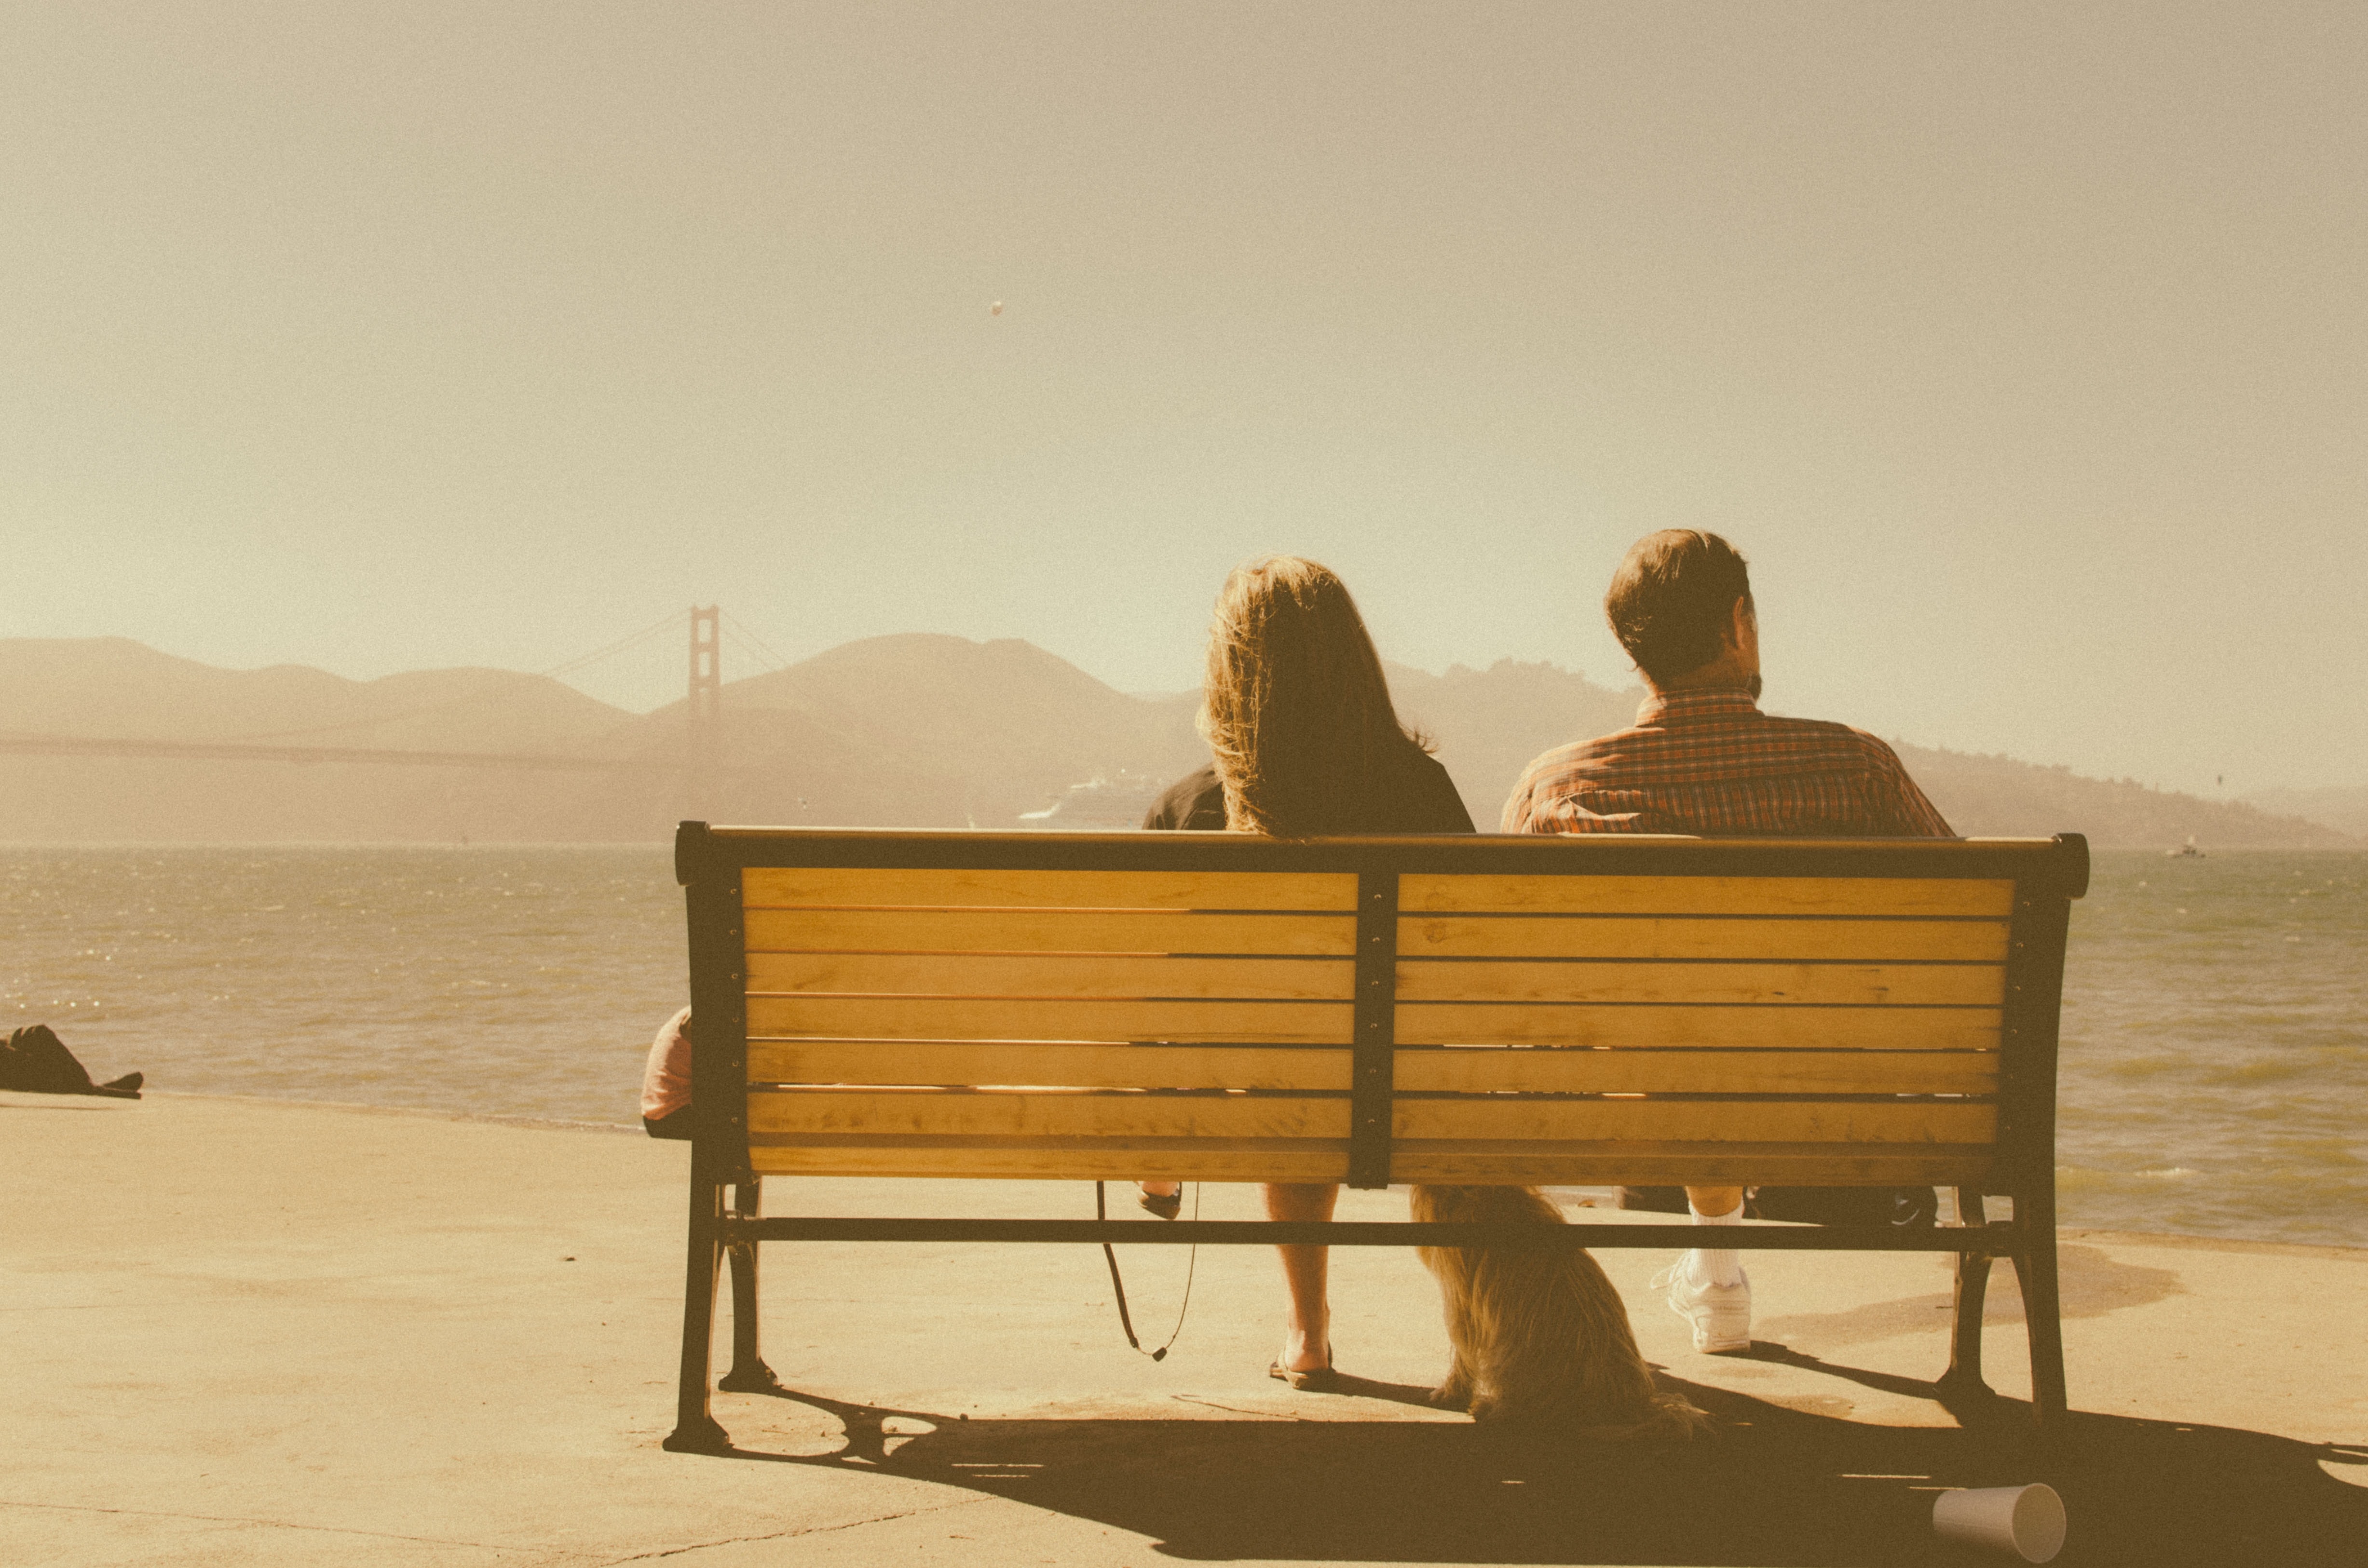 Couple on a bench.